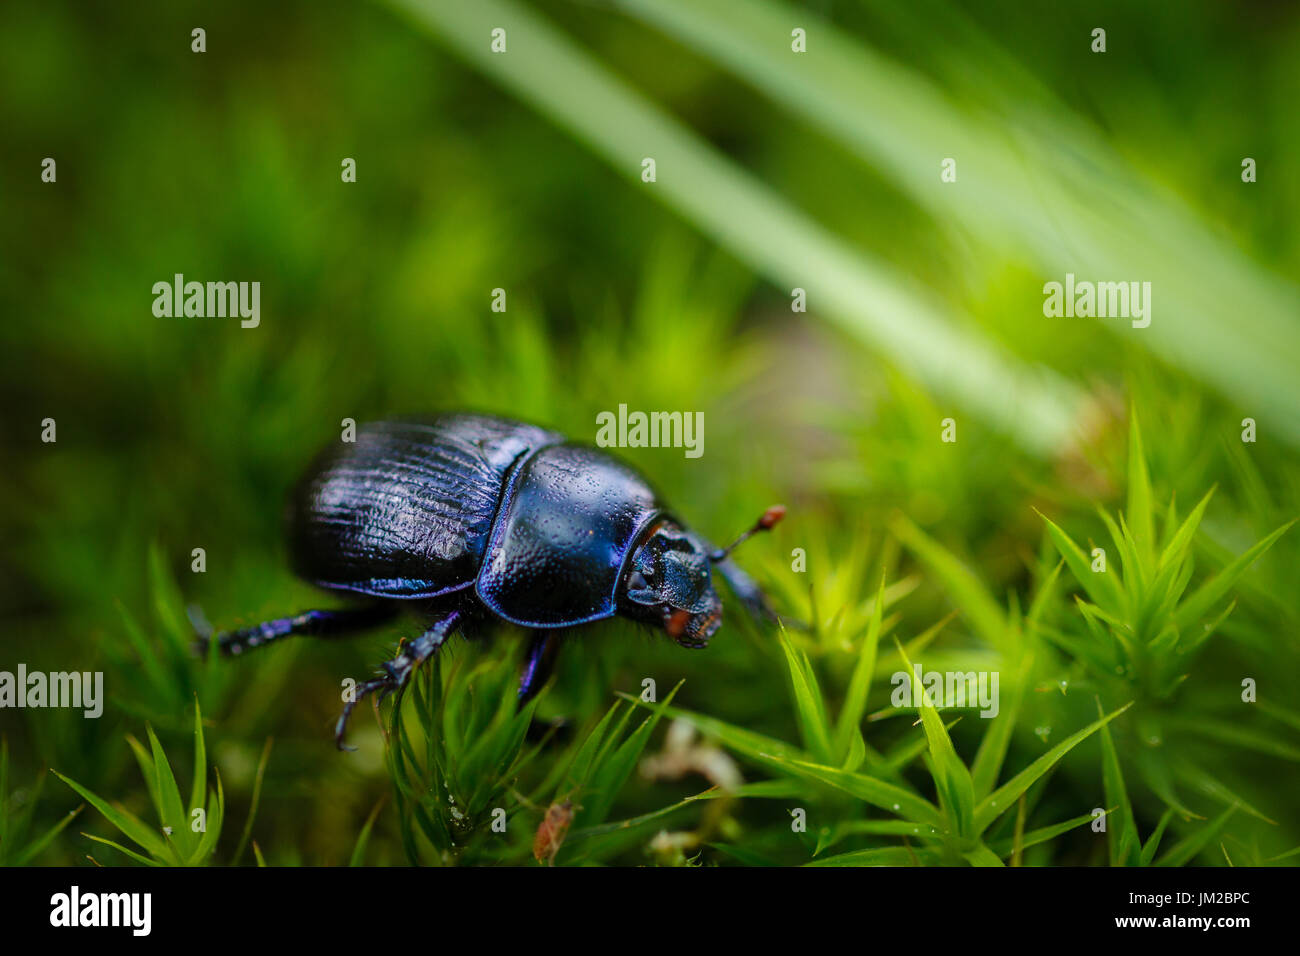 Dung beetle on green moss and grass in forest. Stock Photo